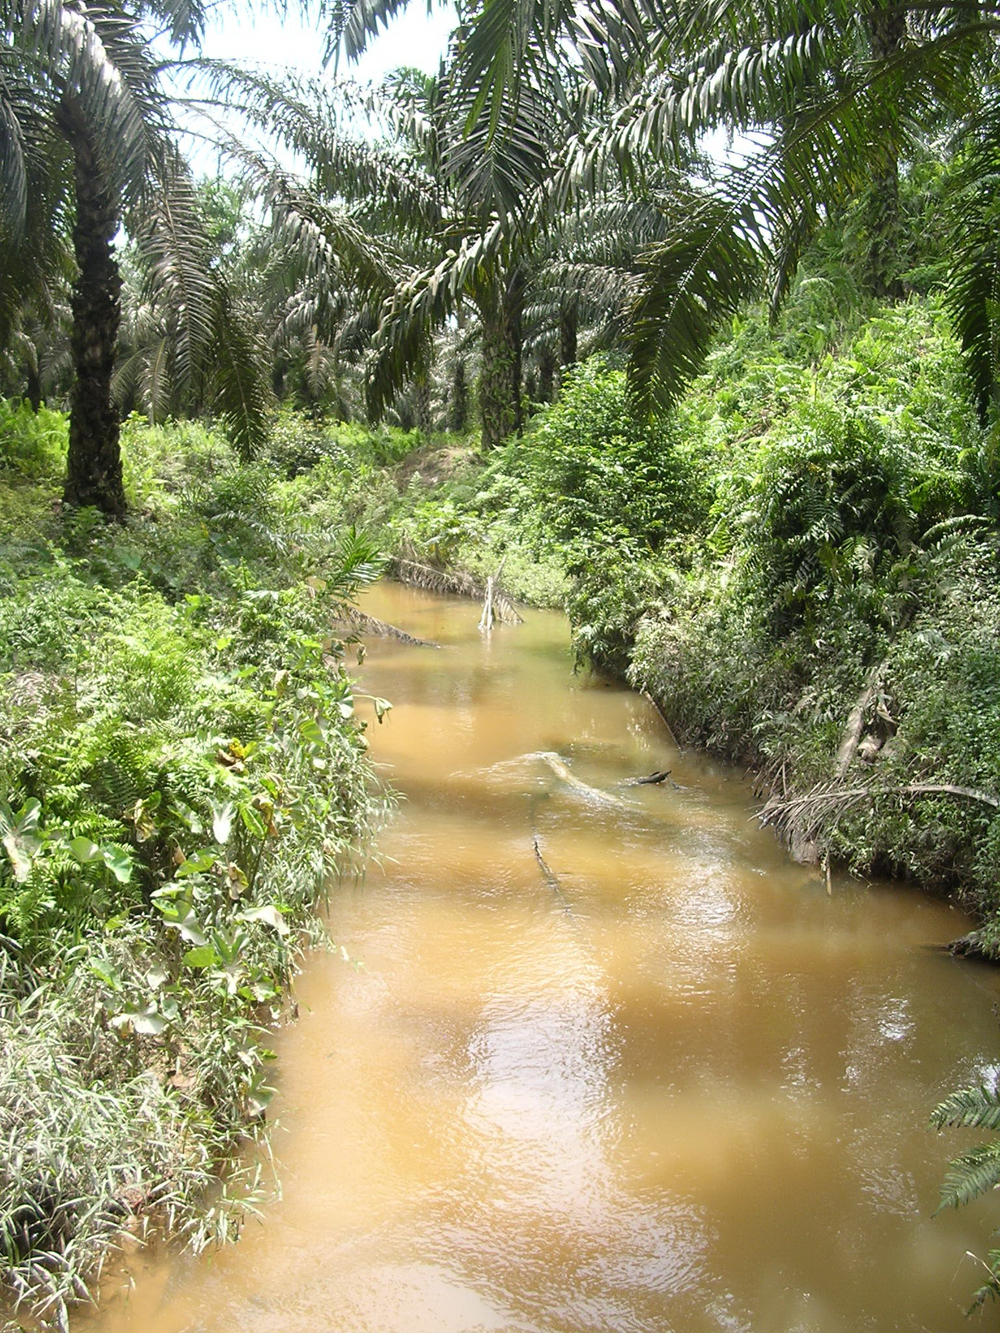 A stream running through a ten-year old oil palm plantation in West Kalimantan, Indonesian Borneo (Credit: Neli Lisnawat)